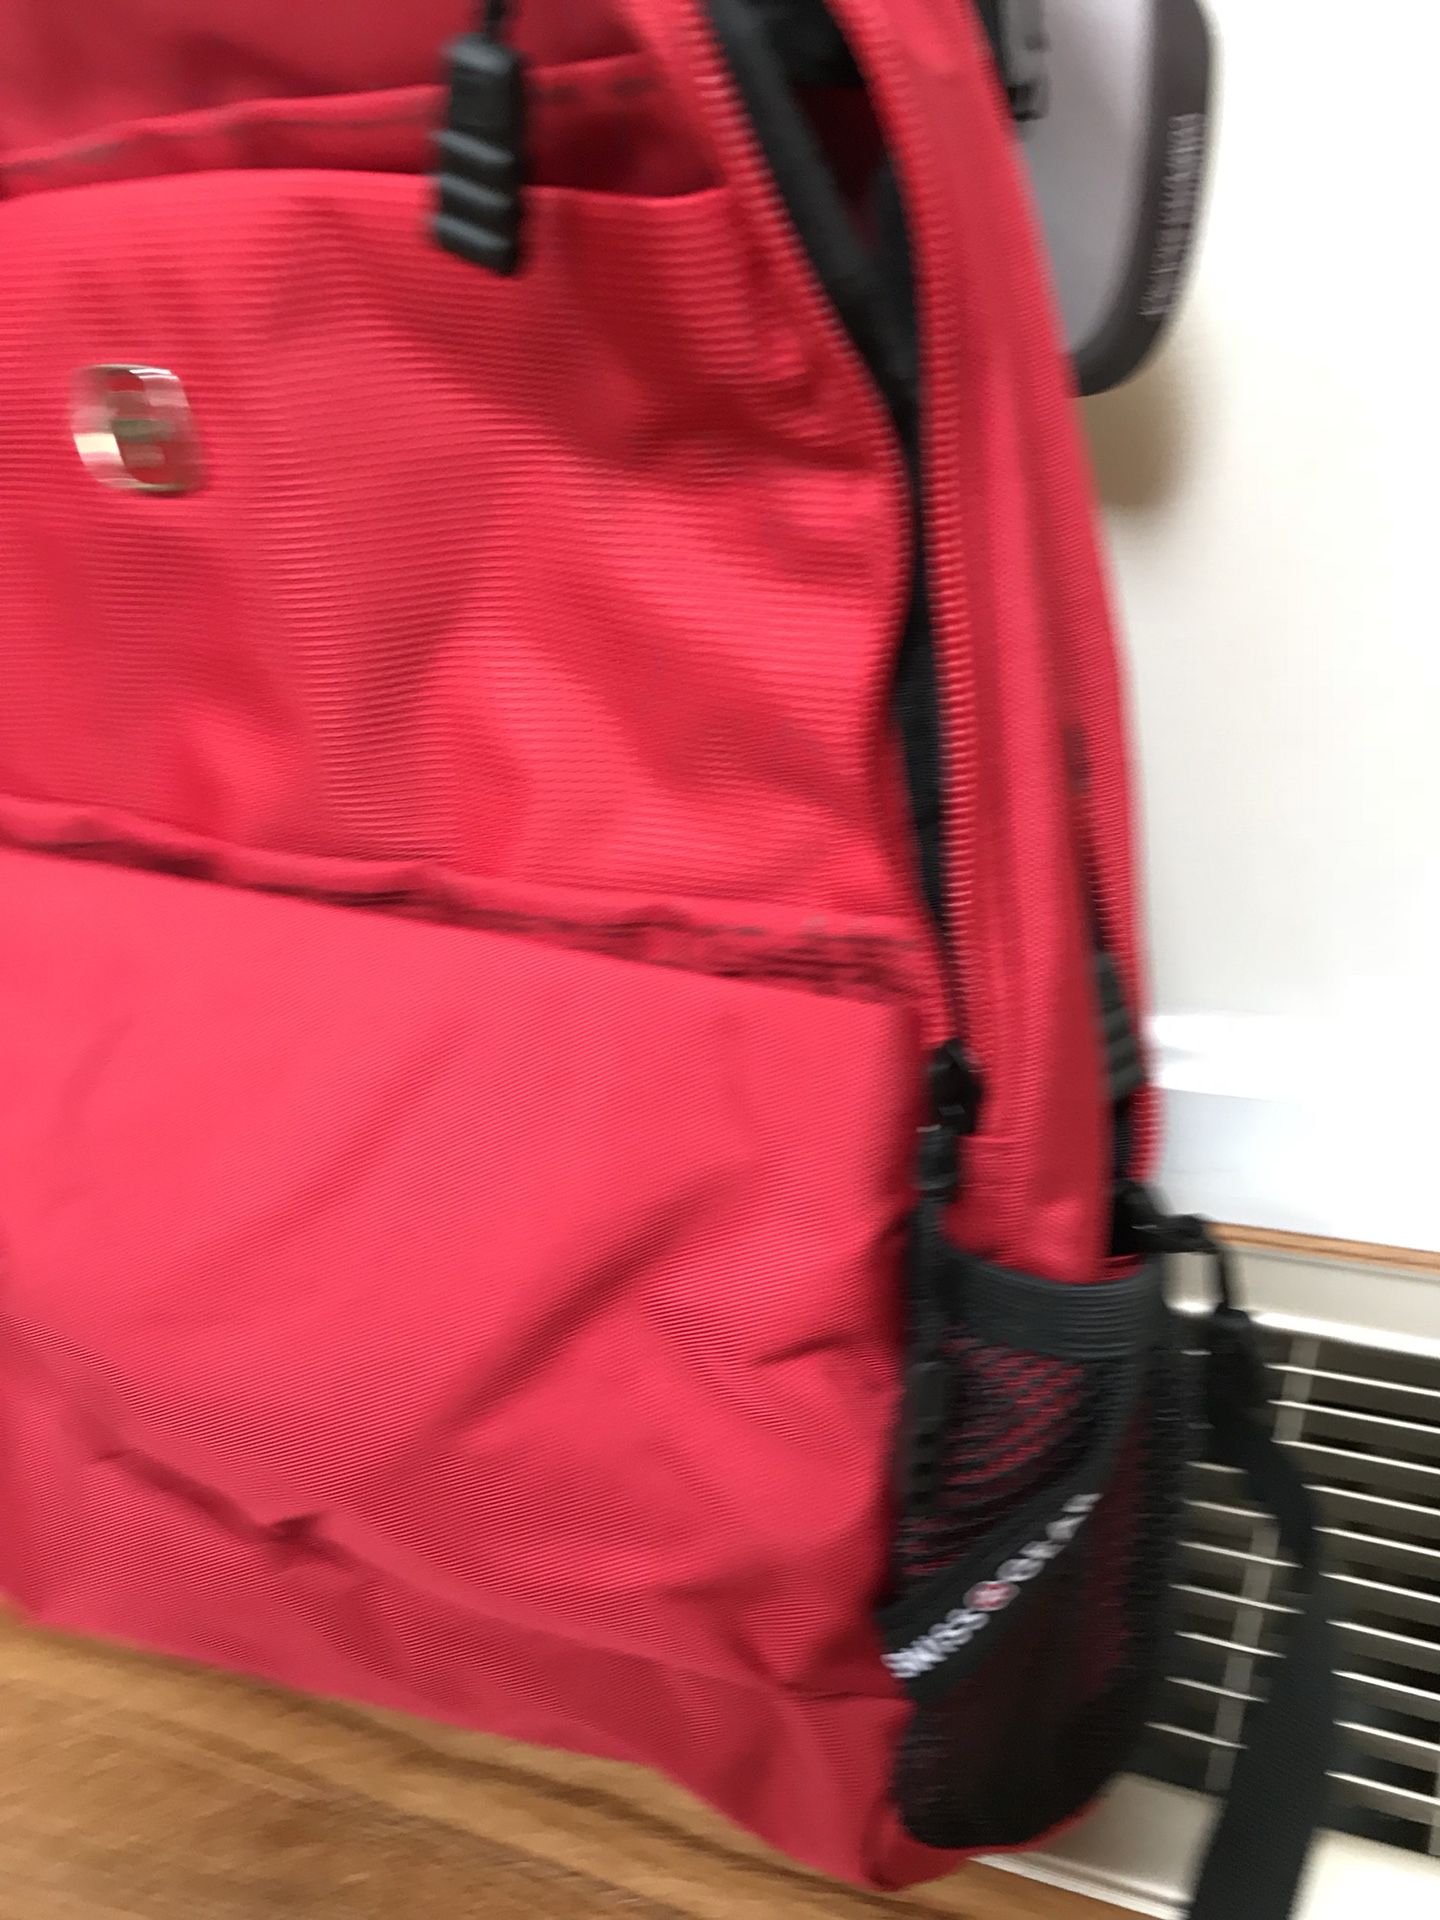 Swiss gear gray 15” laptop backpack (Red and Gray)